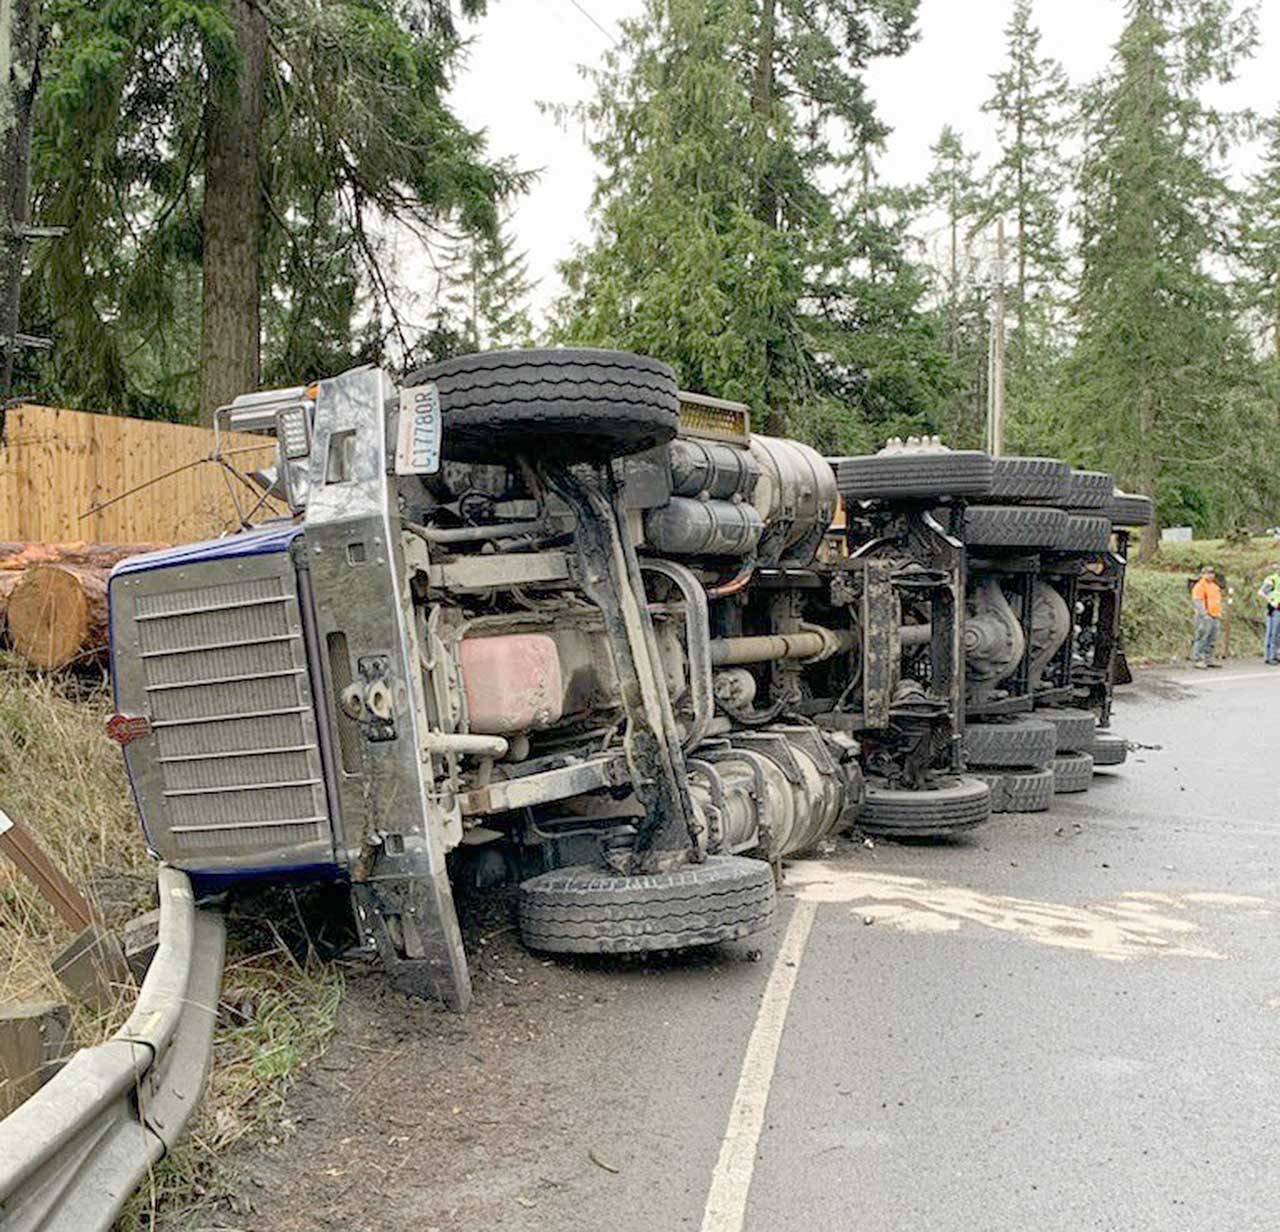 A log truck overturned on the exit from U.S. Highway 101 to state Route 117. (Washington State Patrol)